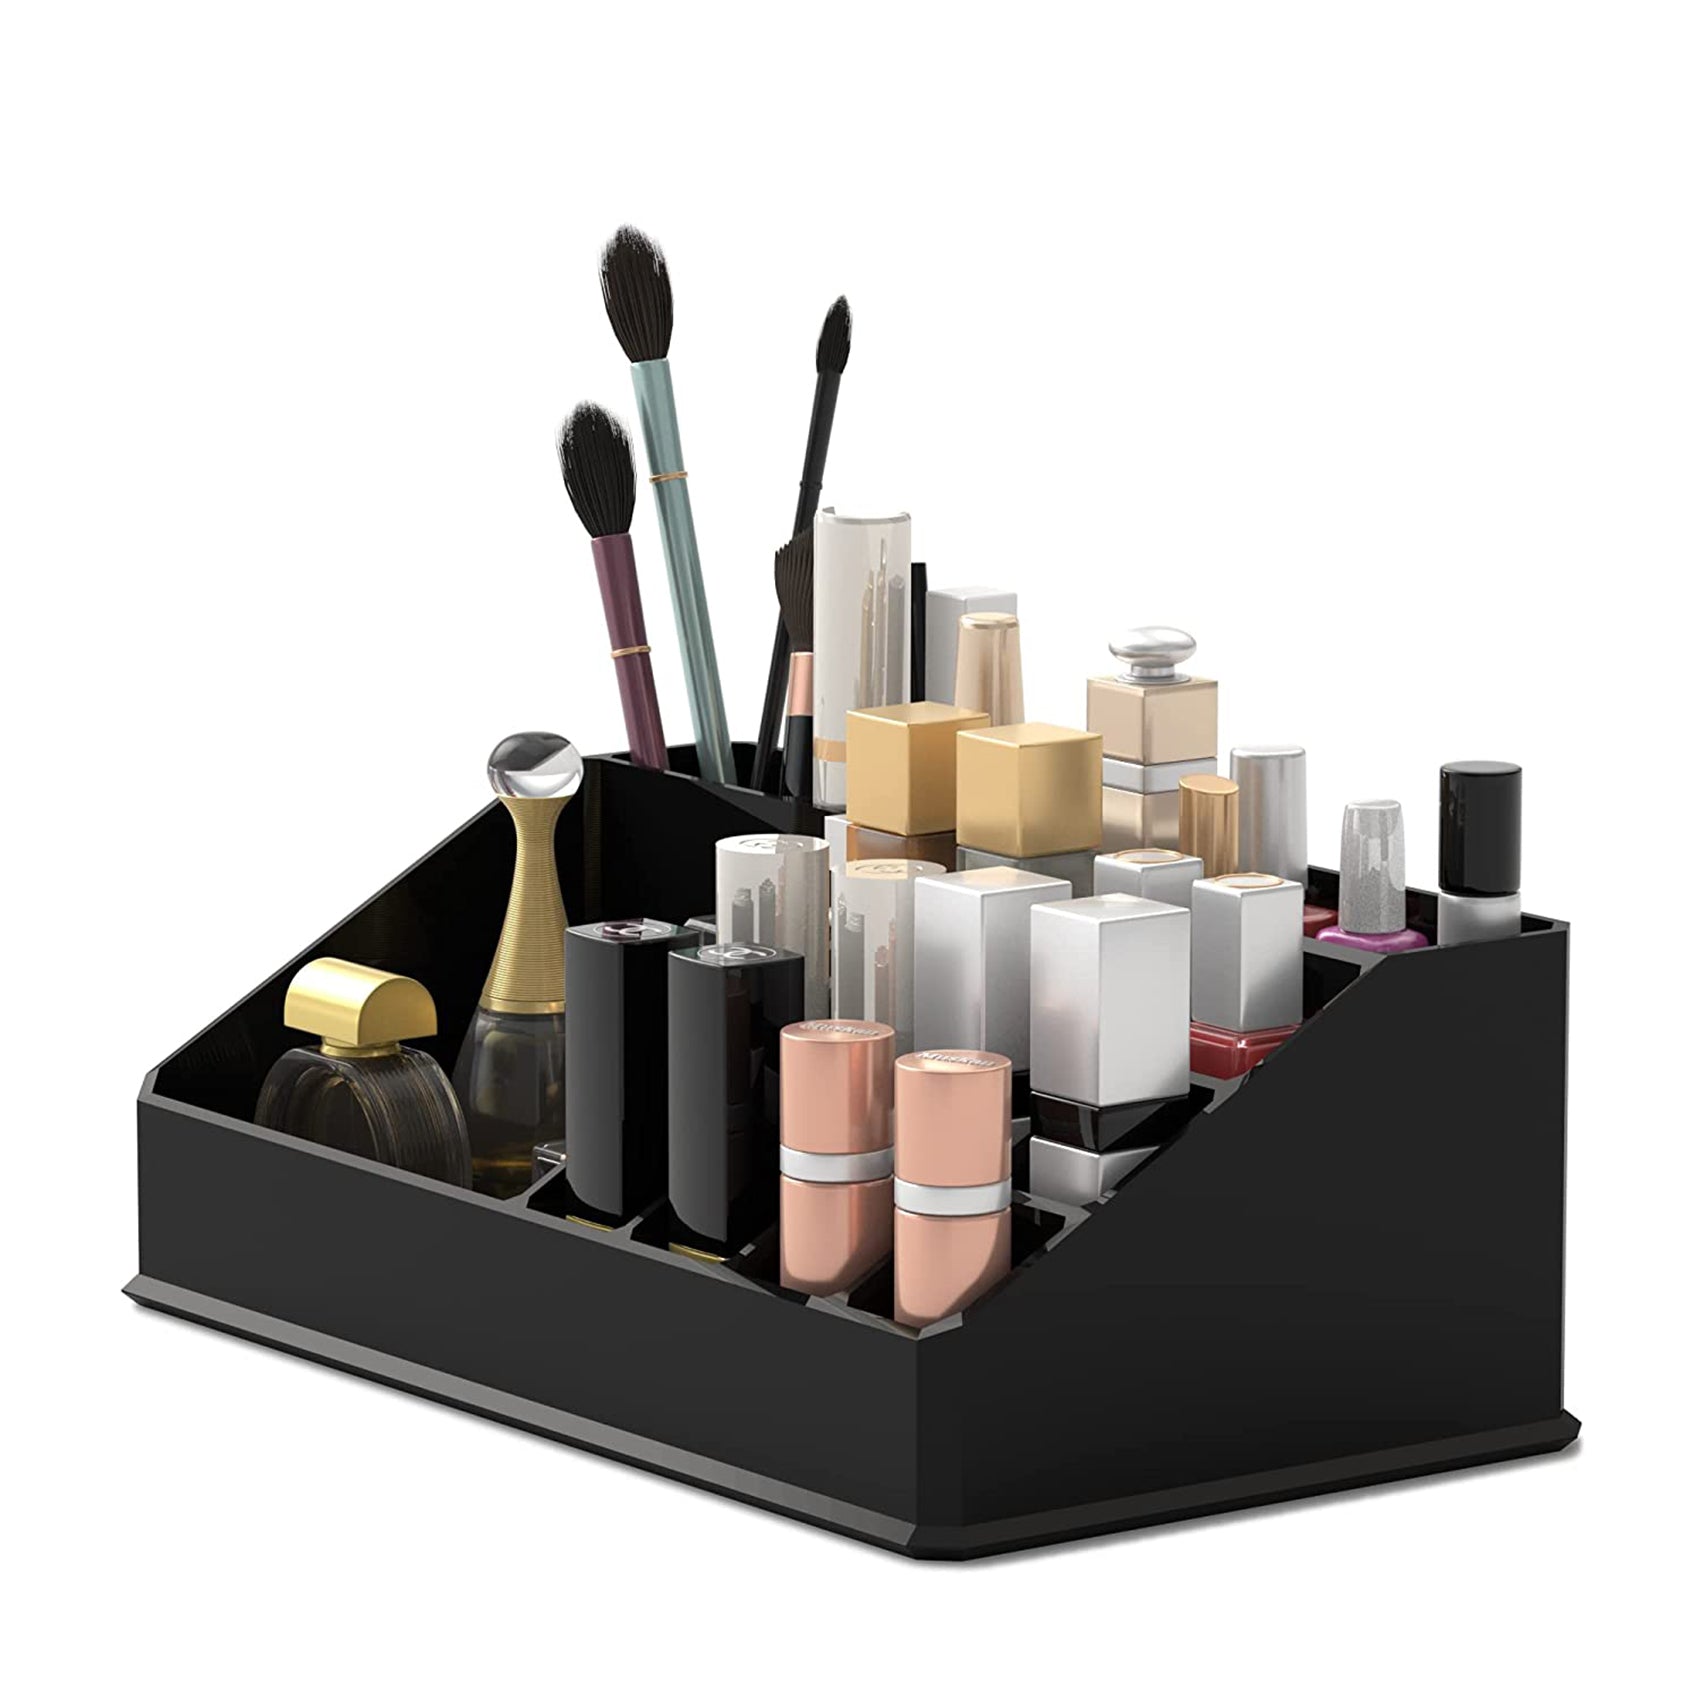 ALOXE Acrylic Cosmetic and Makeup Organizer: Lipstick Organizer Holder for Efficient Makeup Storage